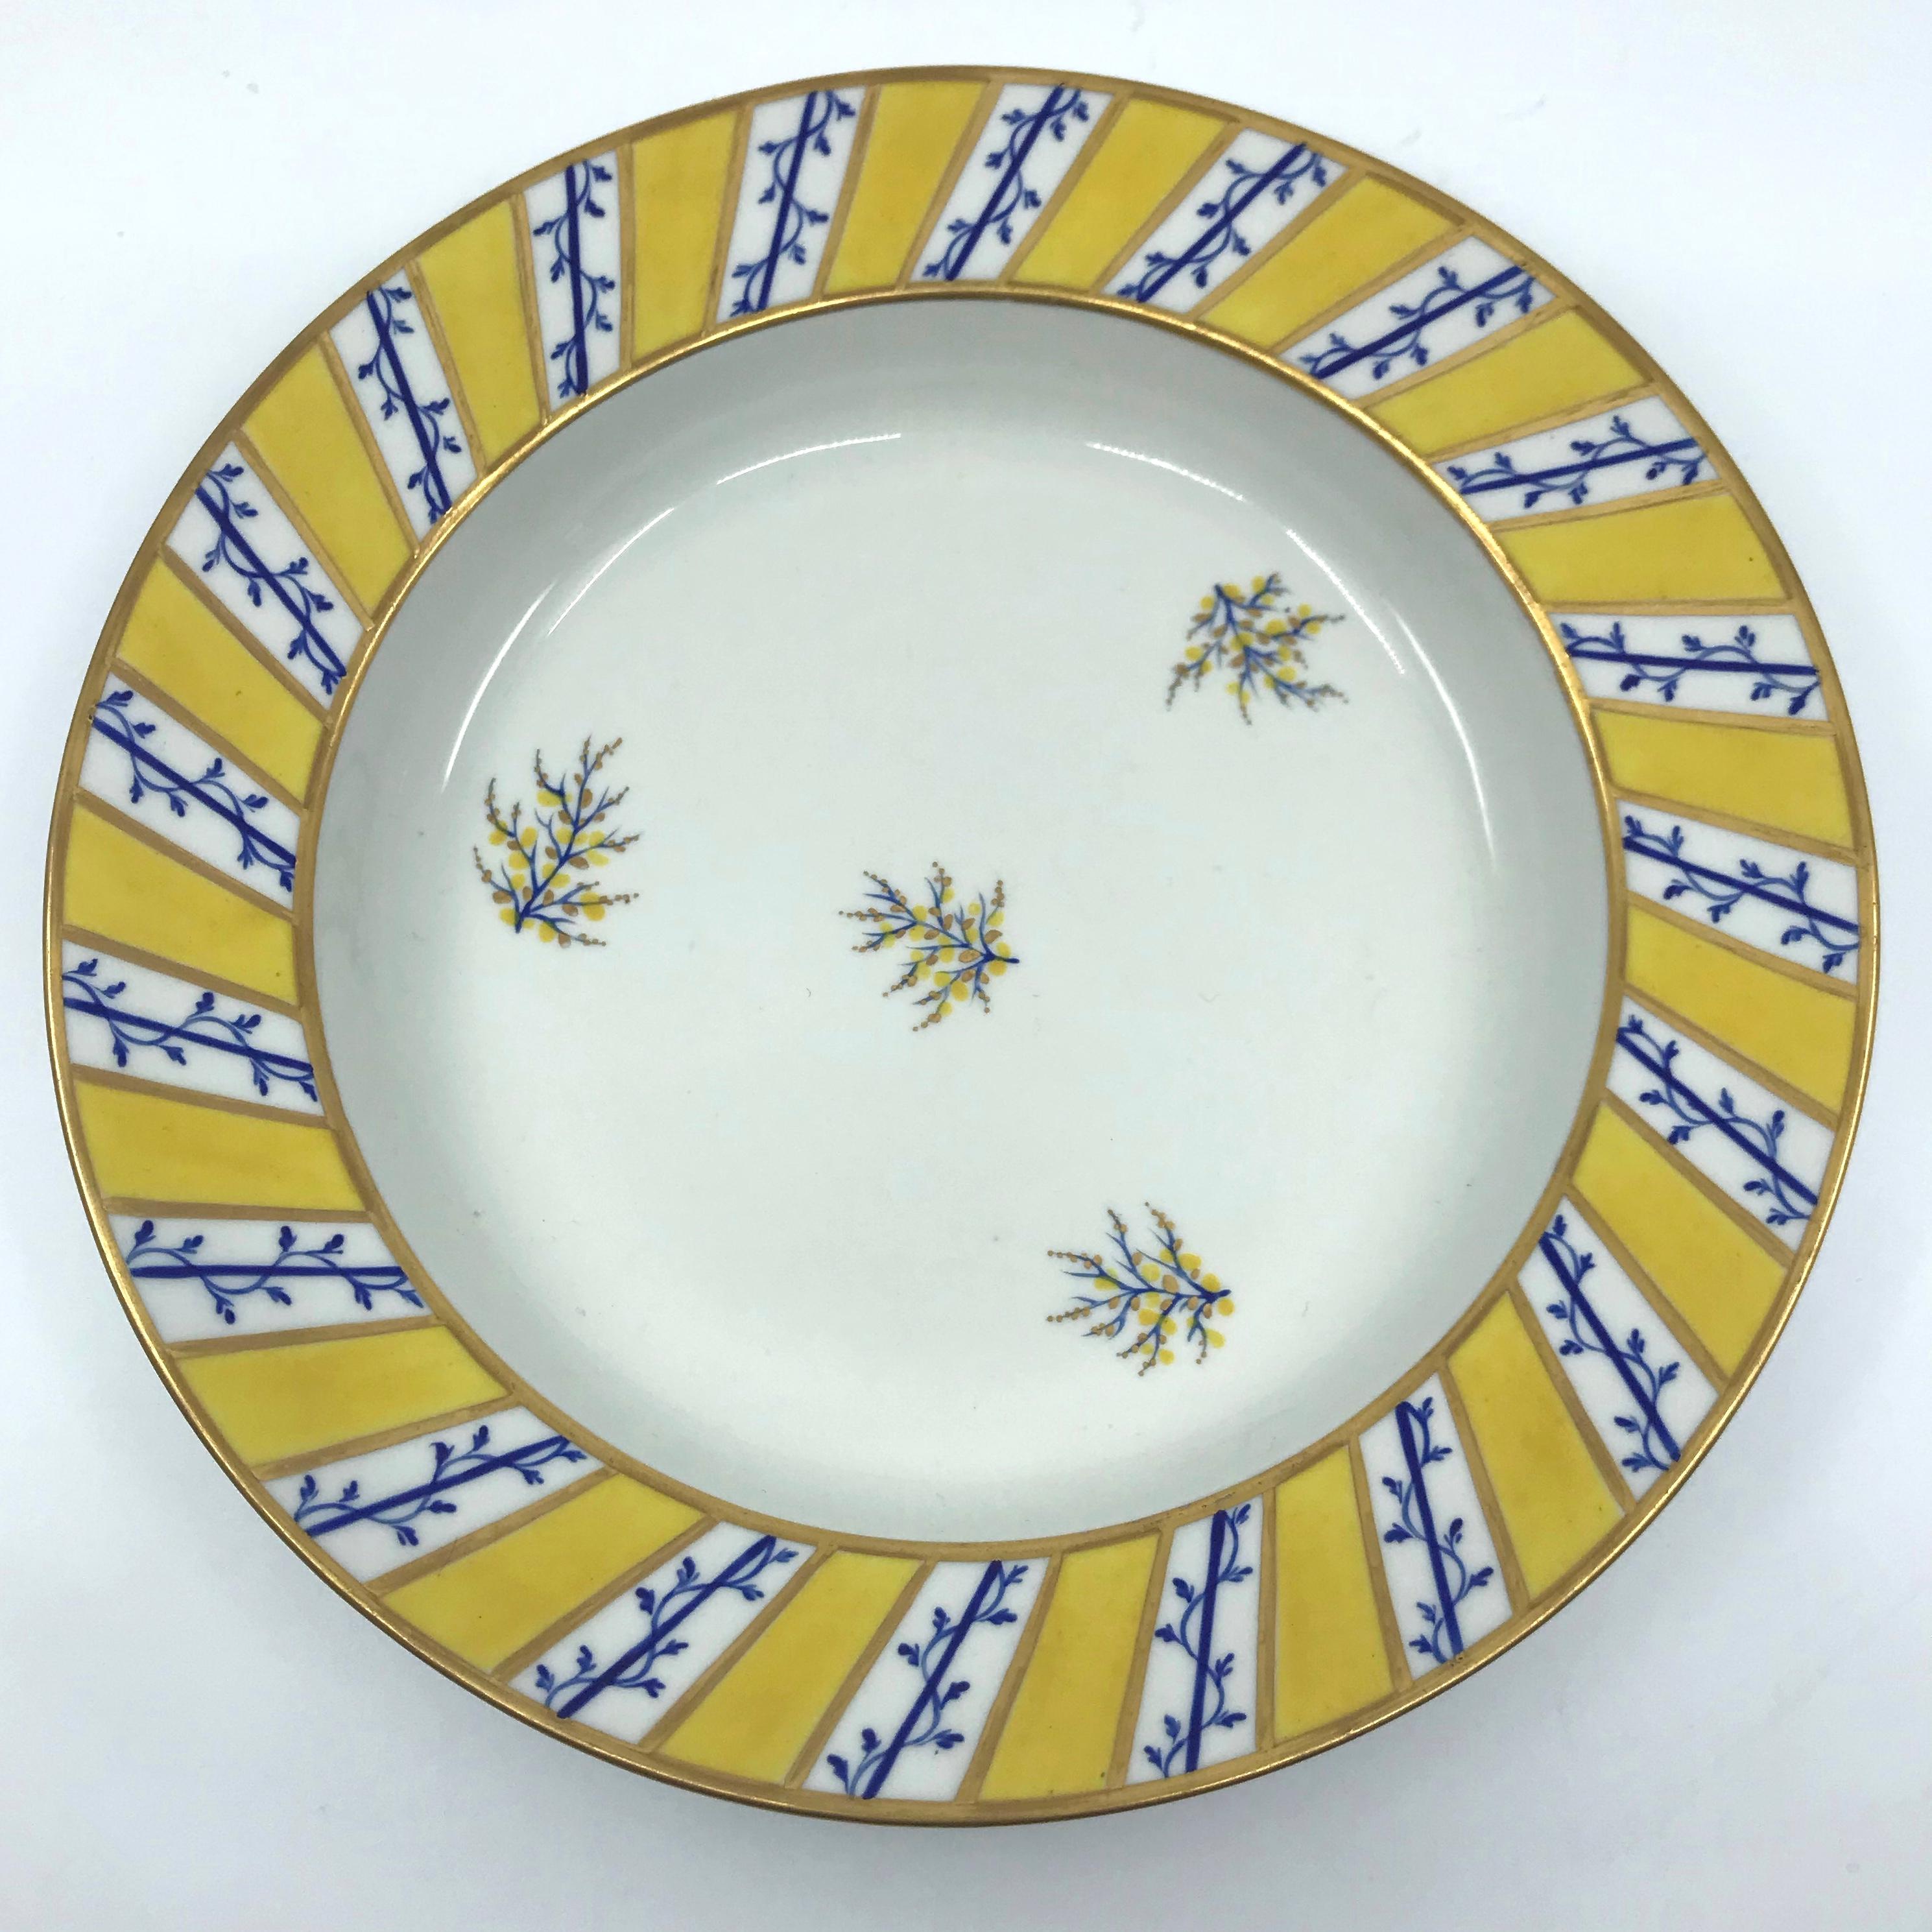 Pair blue and yellow gilt Derby soup plates. Pair hand-painted and gilt soups with alternating yellow and white striped gilt banded border with blue floral stems surrounding five blue yellow and gilt floral sprigs on a white ground. Puce under